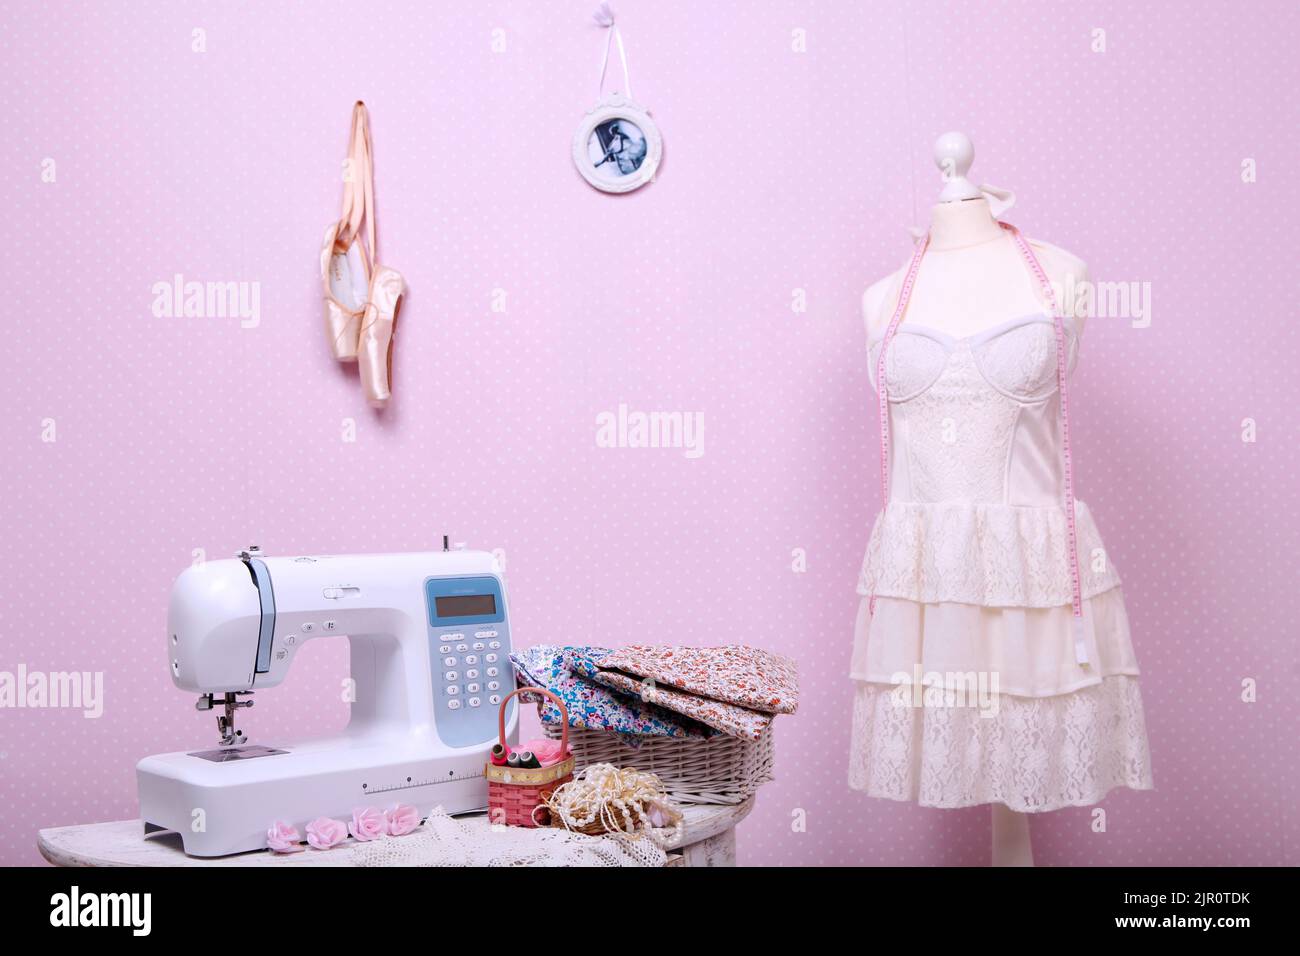 Composition from a sewing machine. Mannequin, flowers on a retro table and threads. Sewing supplies and composition with a sewing machine in the inter Stock Photo